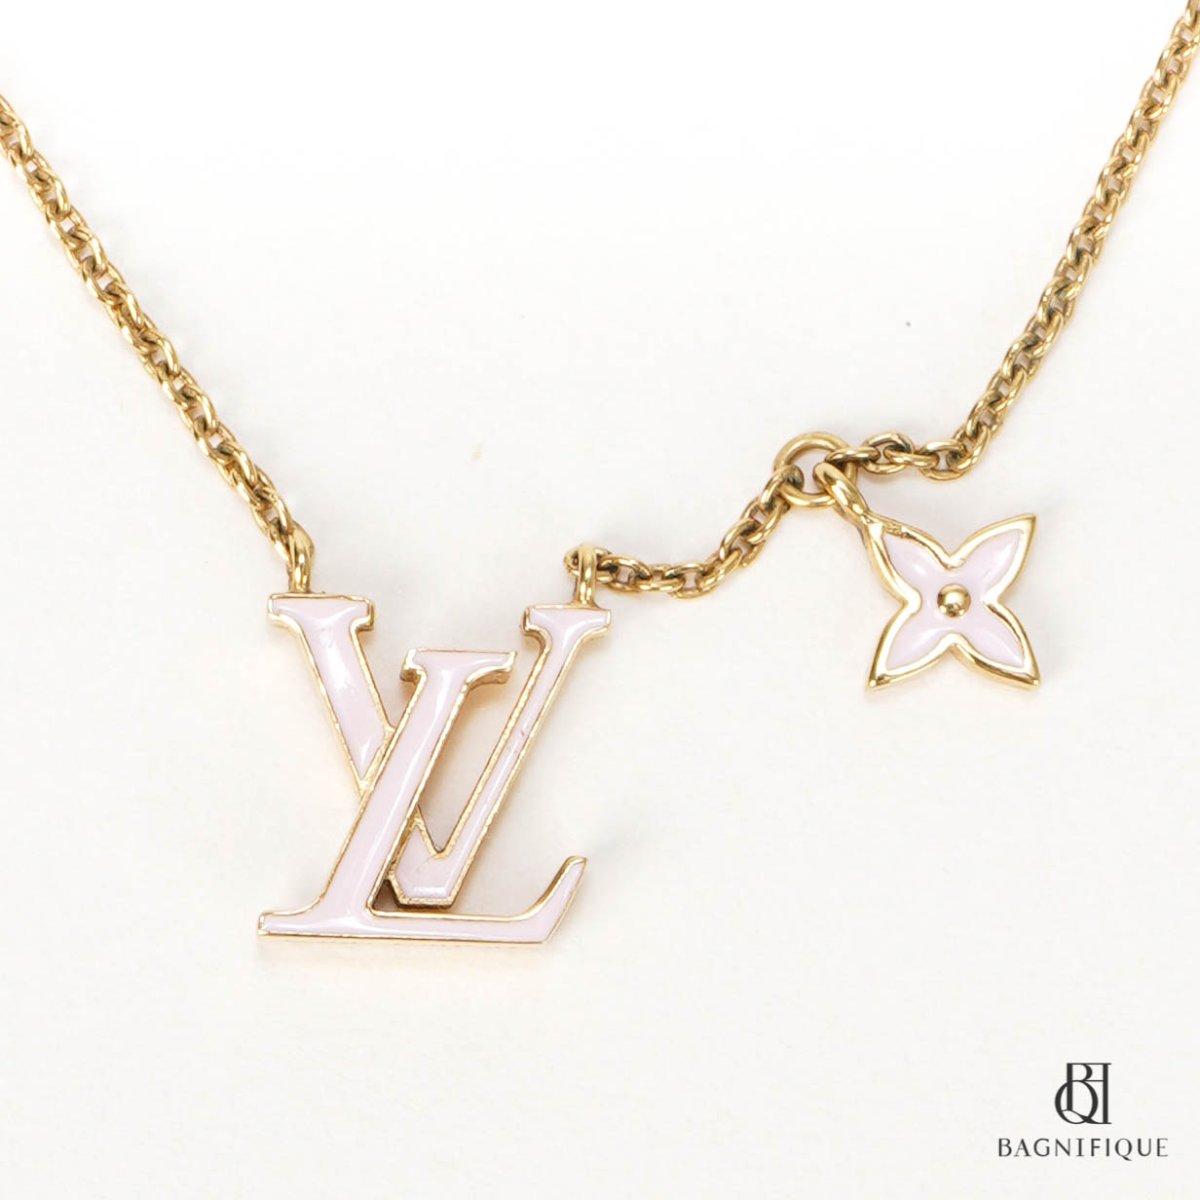 Auth LOUIS VUITTON Necklace LV Iconic Enamel M01215 Gold Pink - BY2243  Necklace